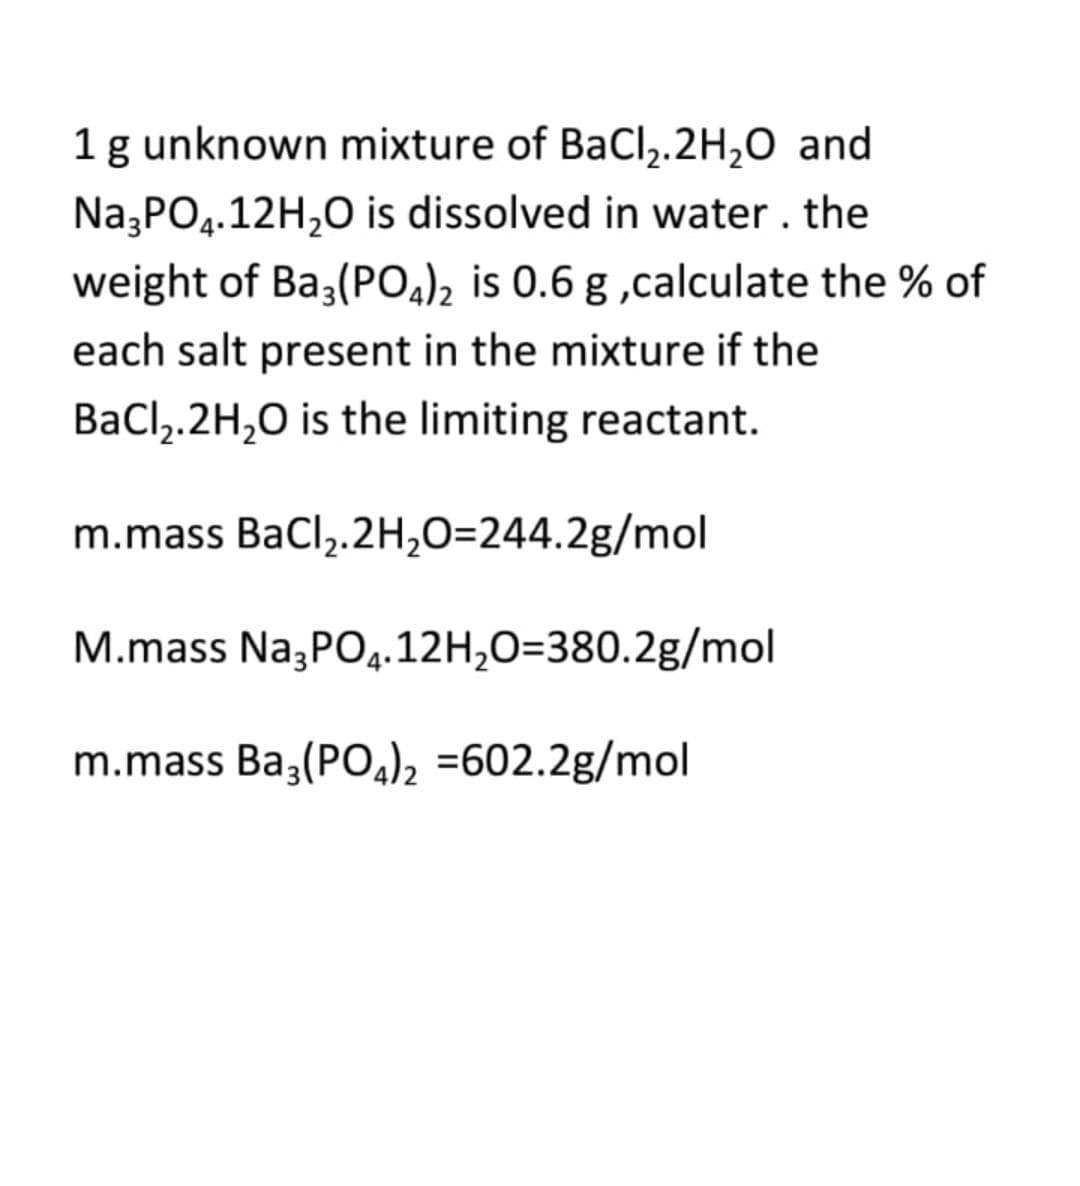 1 g unknown mixture of BaCl,.2H,0 and
Na,PO4.12H,0 is dissolved in water. the
weight of Ba3(POa)2 is 0.6 g ,calculate the % of
each salt present in the mixture if the
BaCl,.2H,0 is the limiting reactant.
m.mass BaCl,.2H,O=244.2g/mol
M.mass Na,PO4.12H,O=380.2g/mol
m.mass Ba,(POa)2 =602.2g/mol
